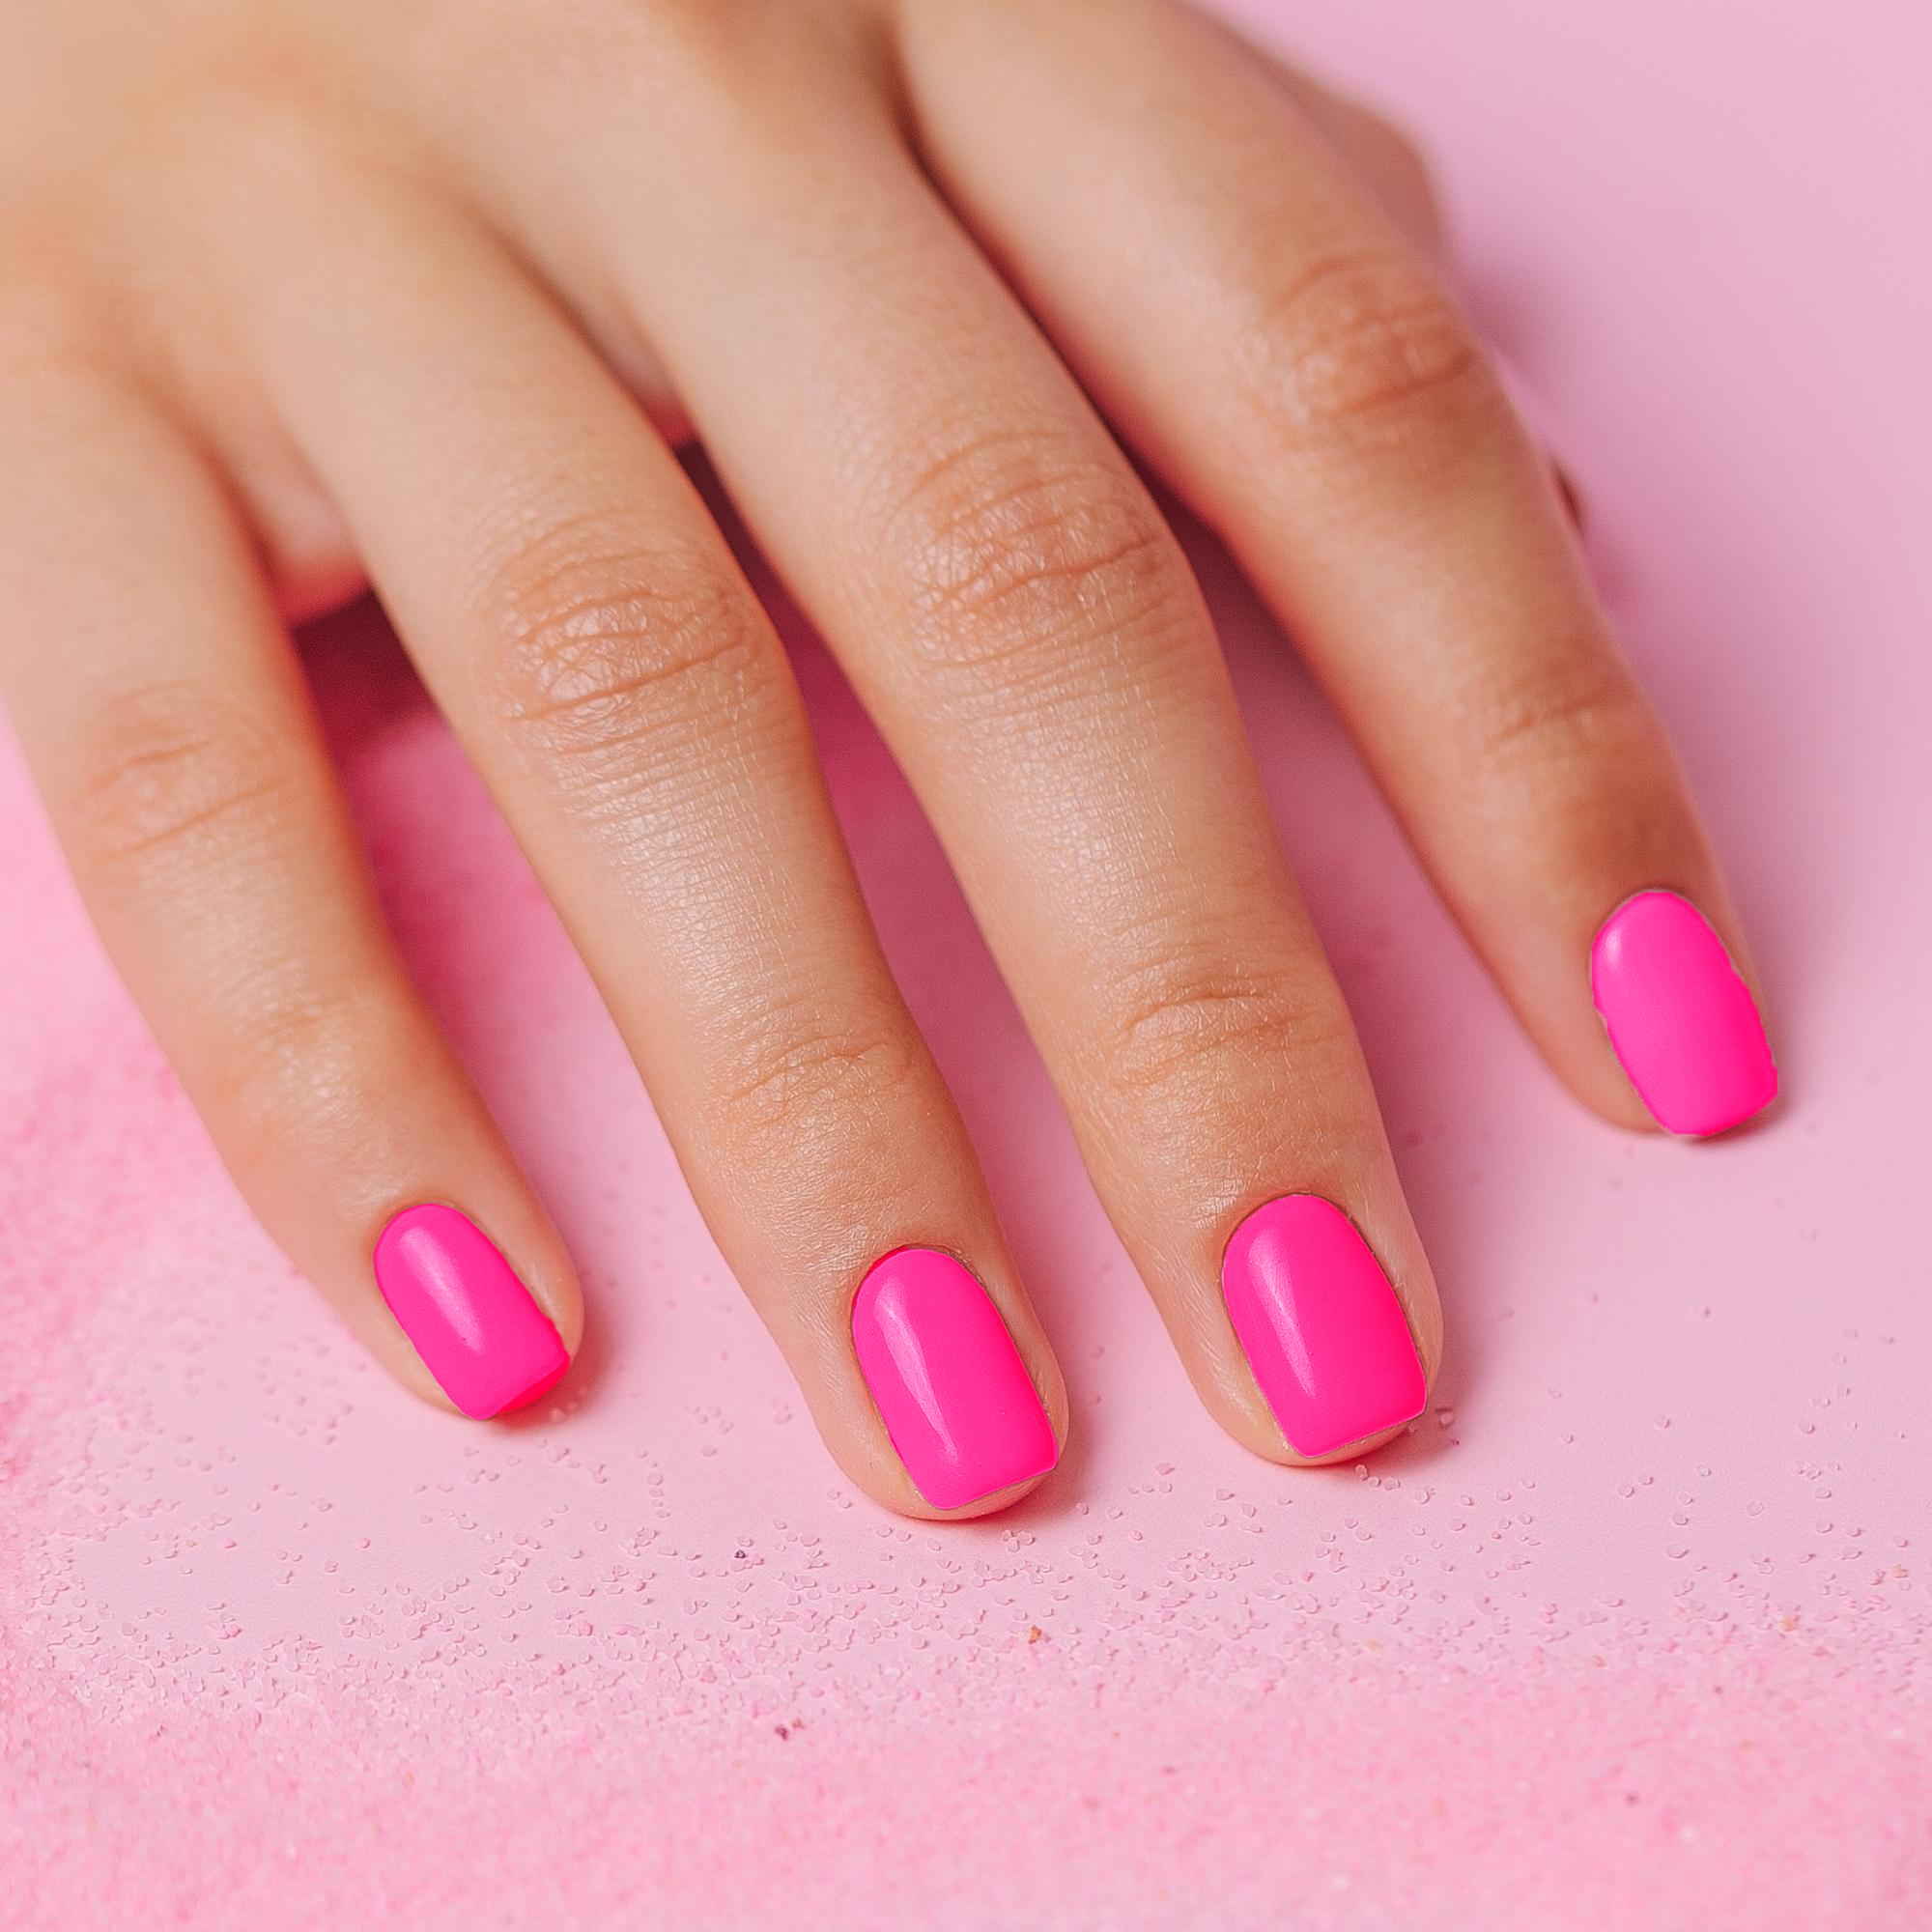 Neon Jelly Nails Are On Trend As The Perfect Spring Manicure